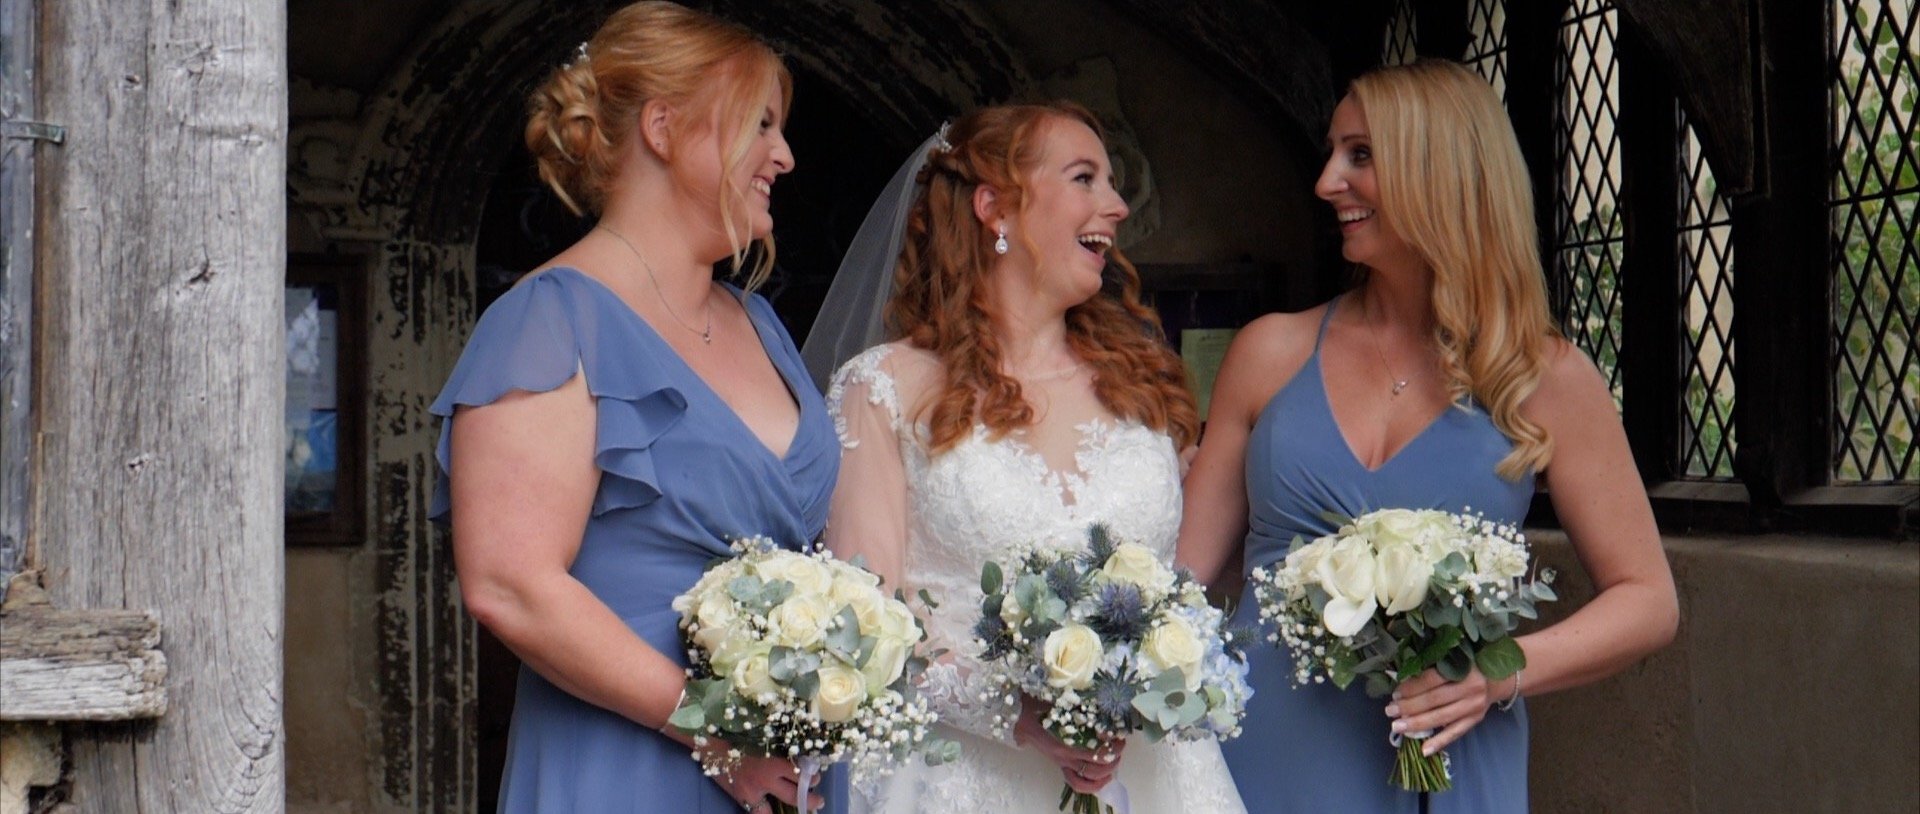 Bride and bridesmaids at chruch in Essex.jpg